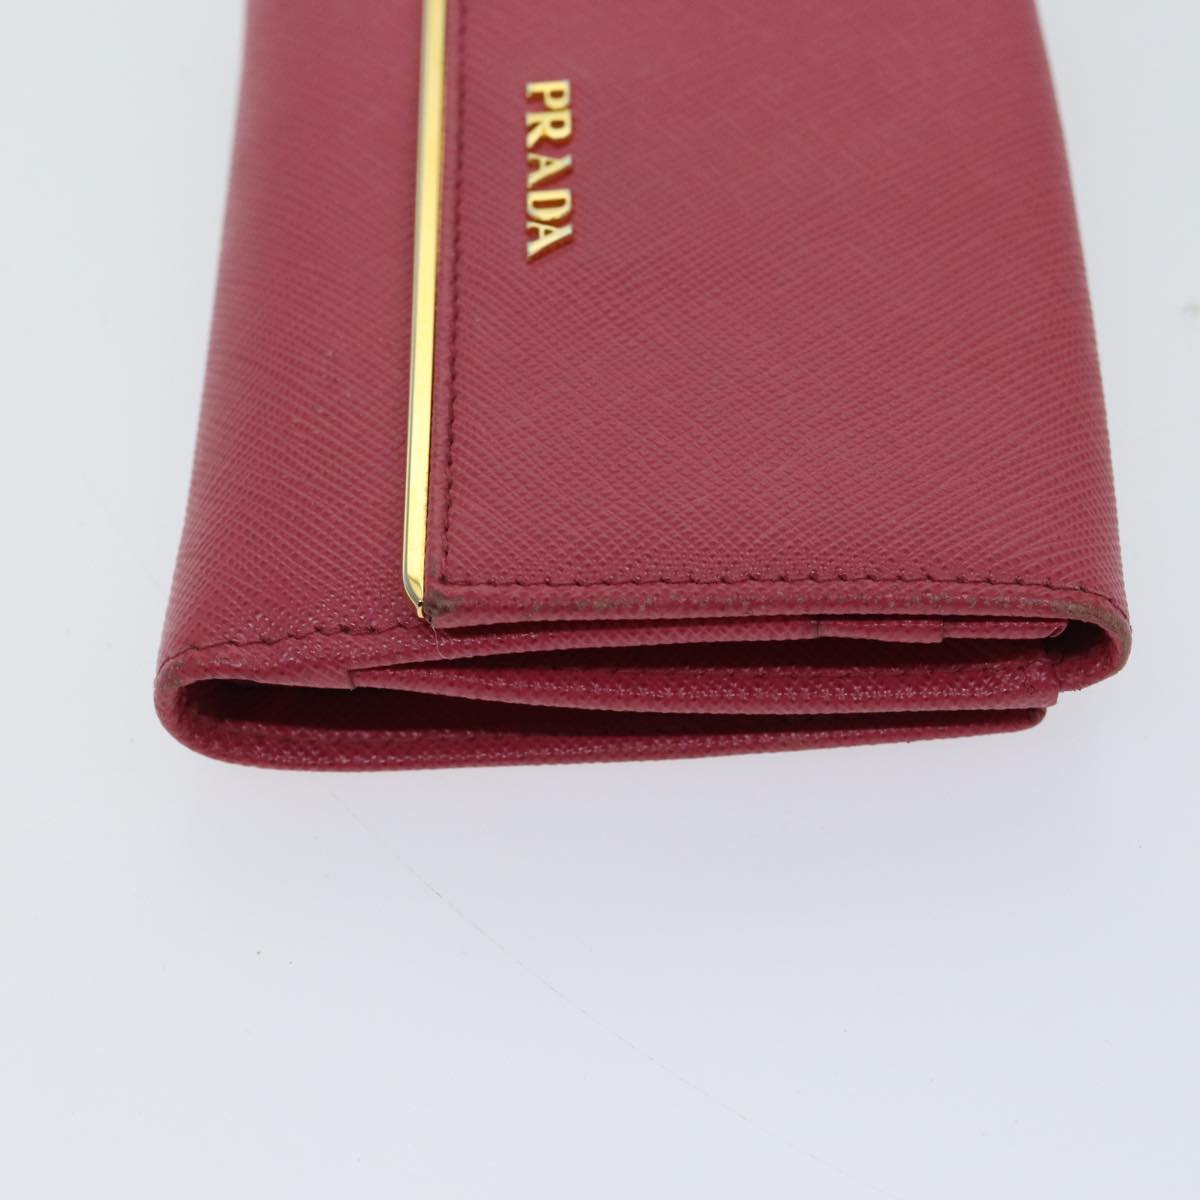 PRADA Wallet Safiano leather Pink Auth 70786